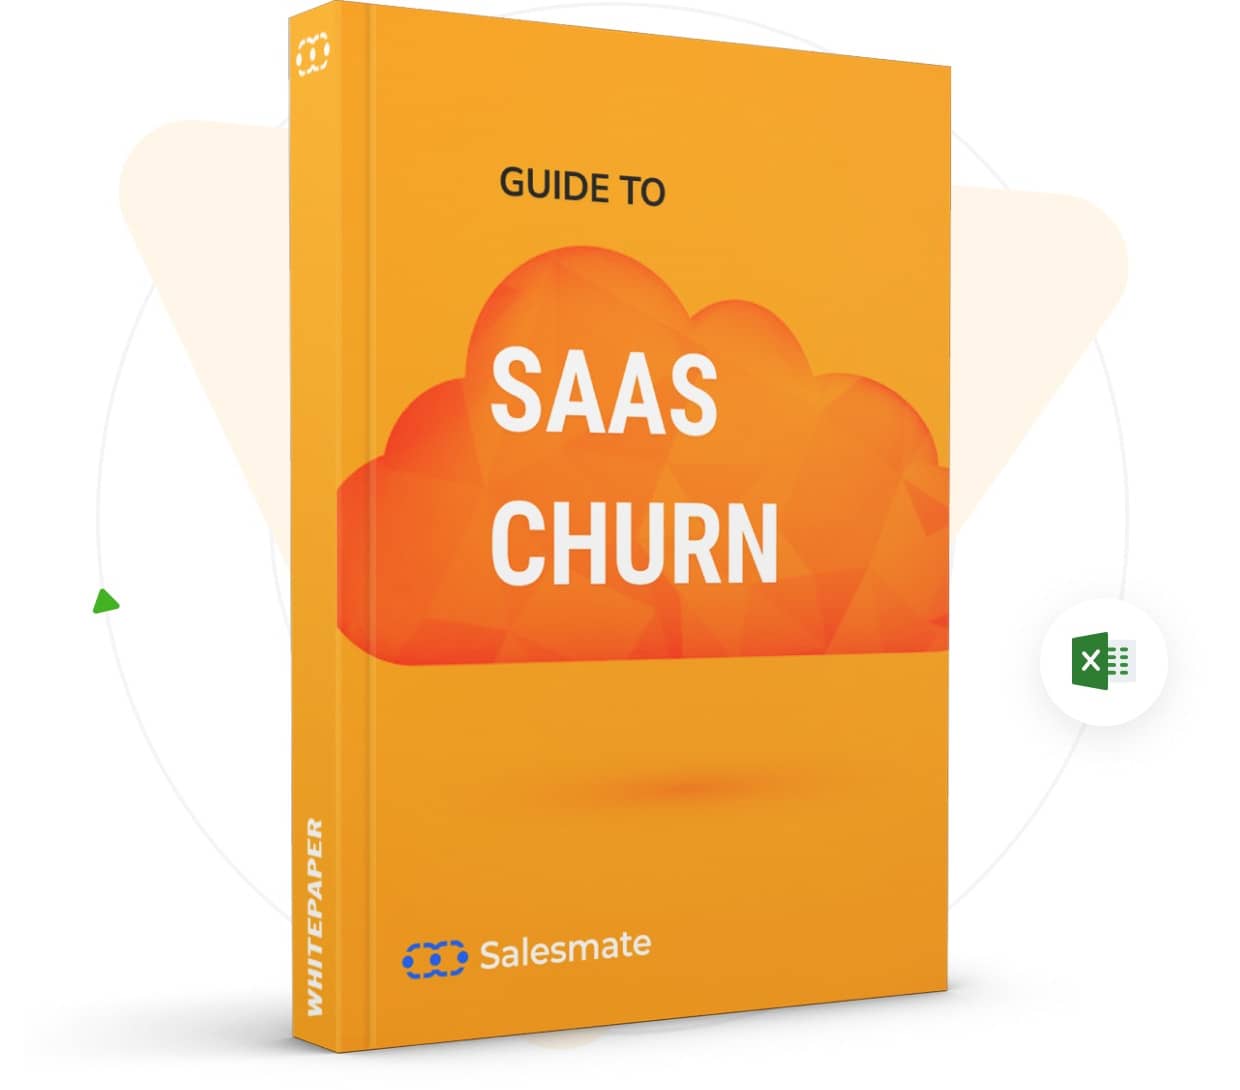 An all-inclusive guide to SaaS churn